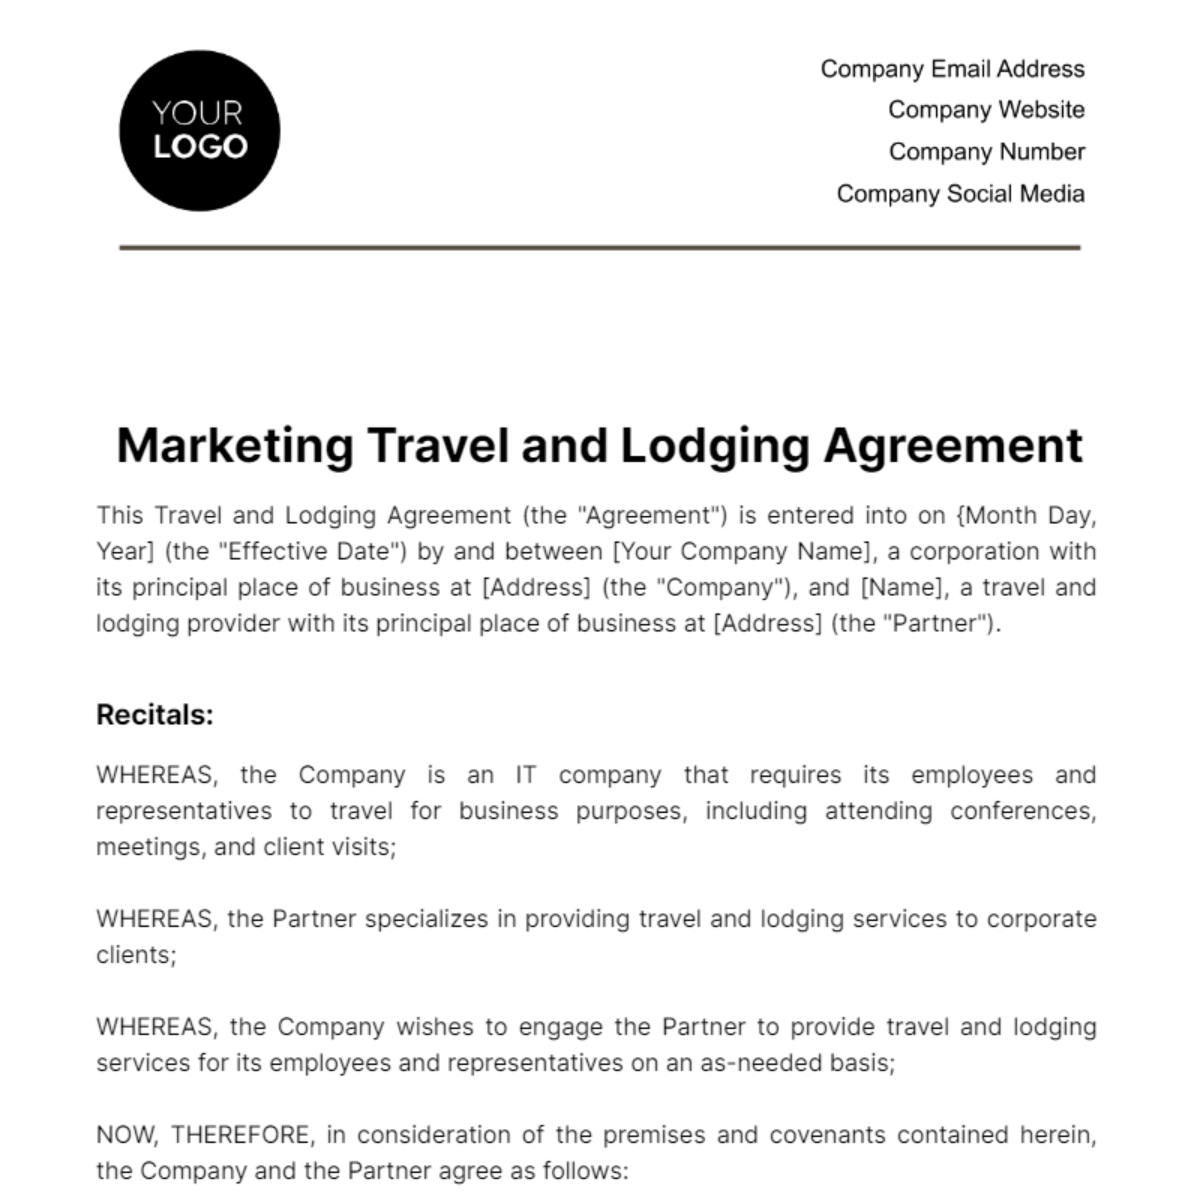 Free Marketing Travel and Lodging Agreement Template